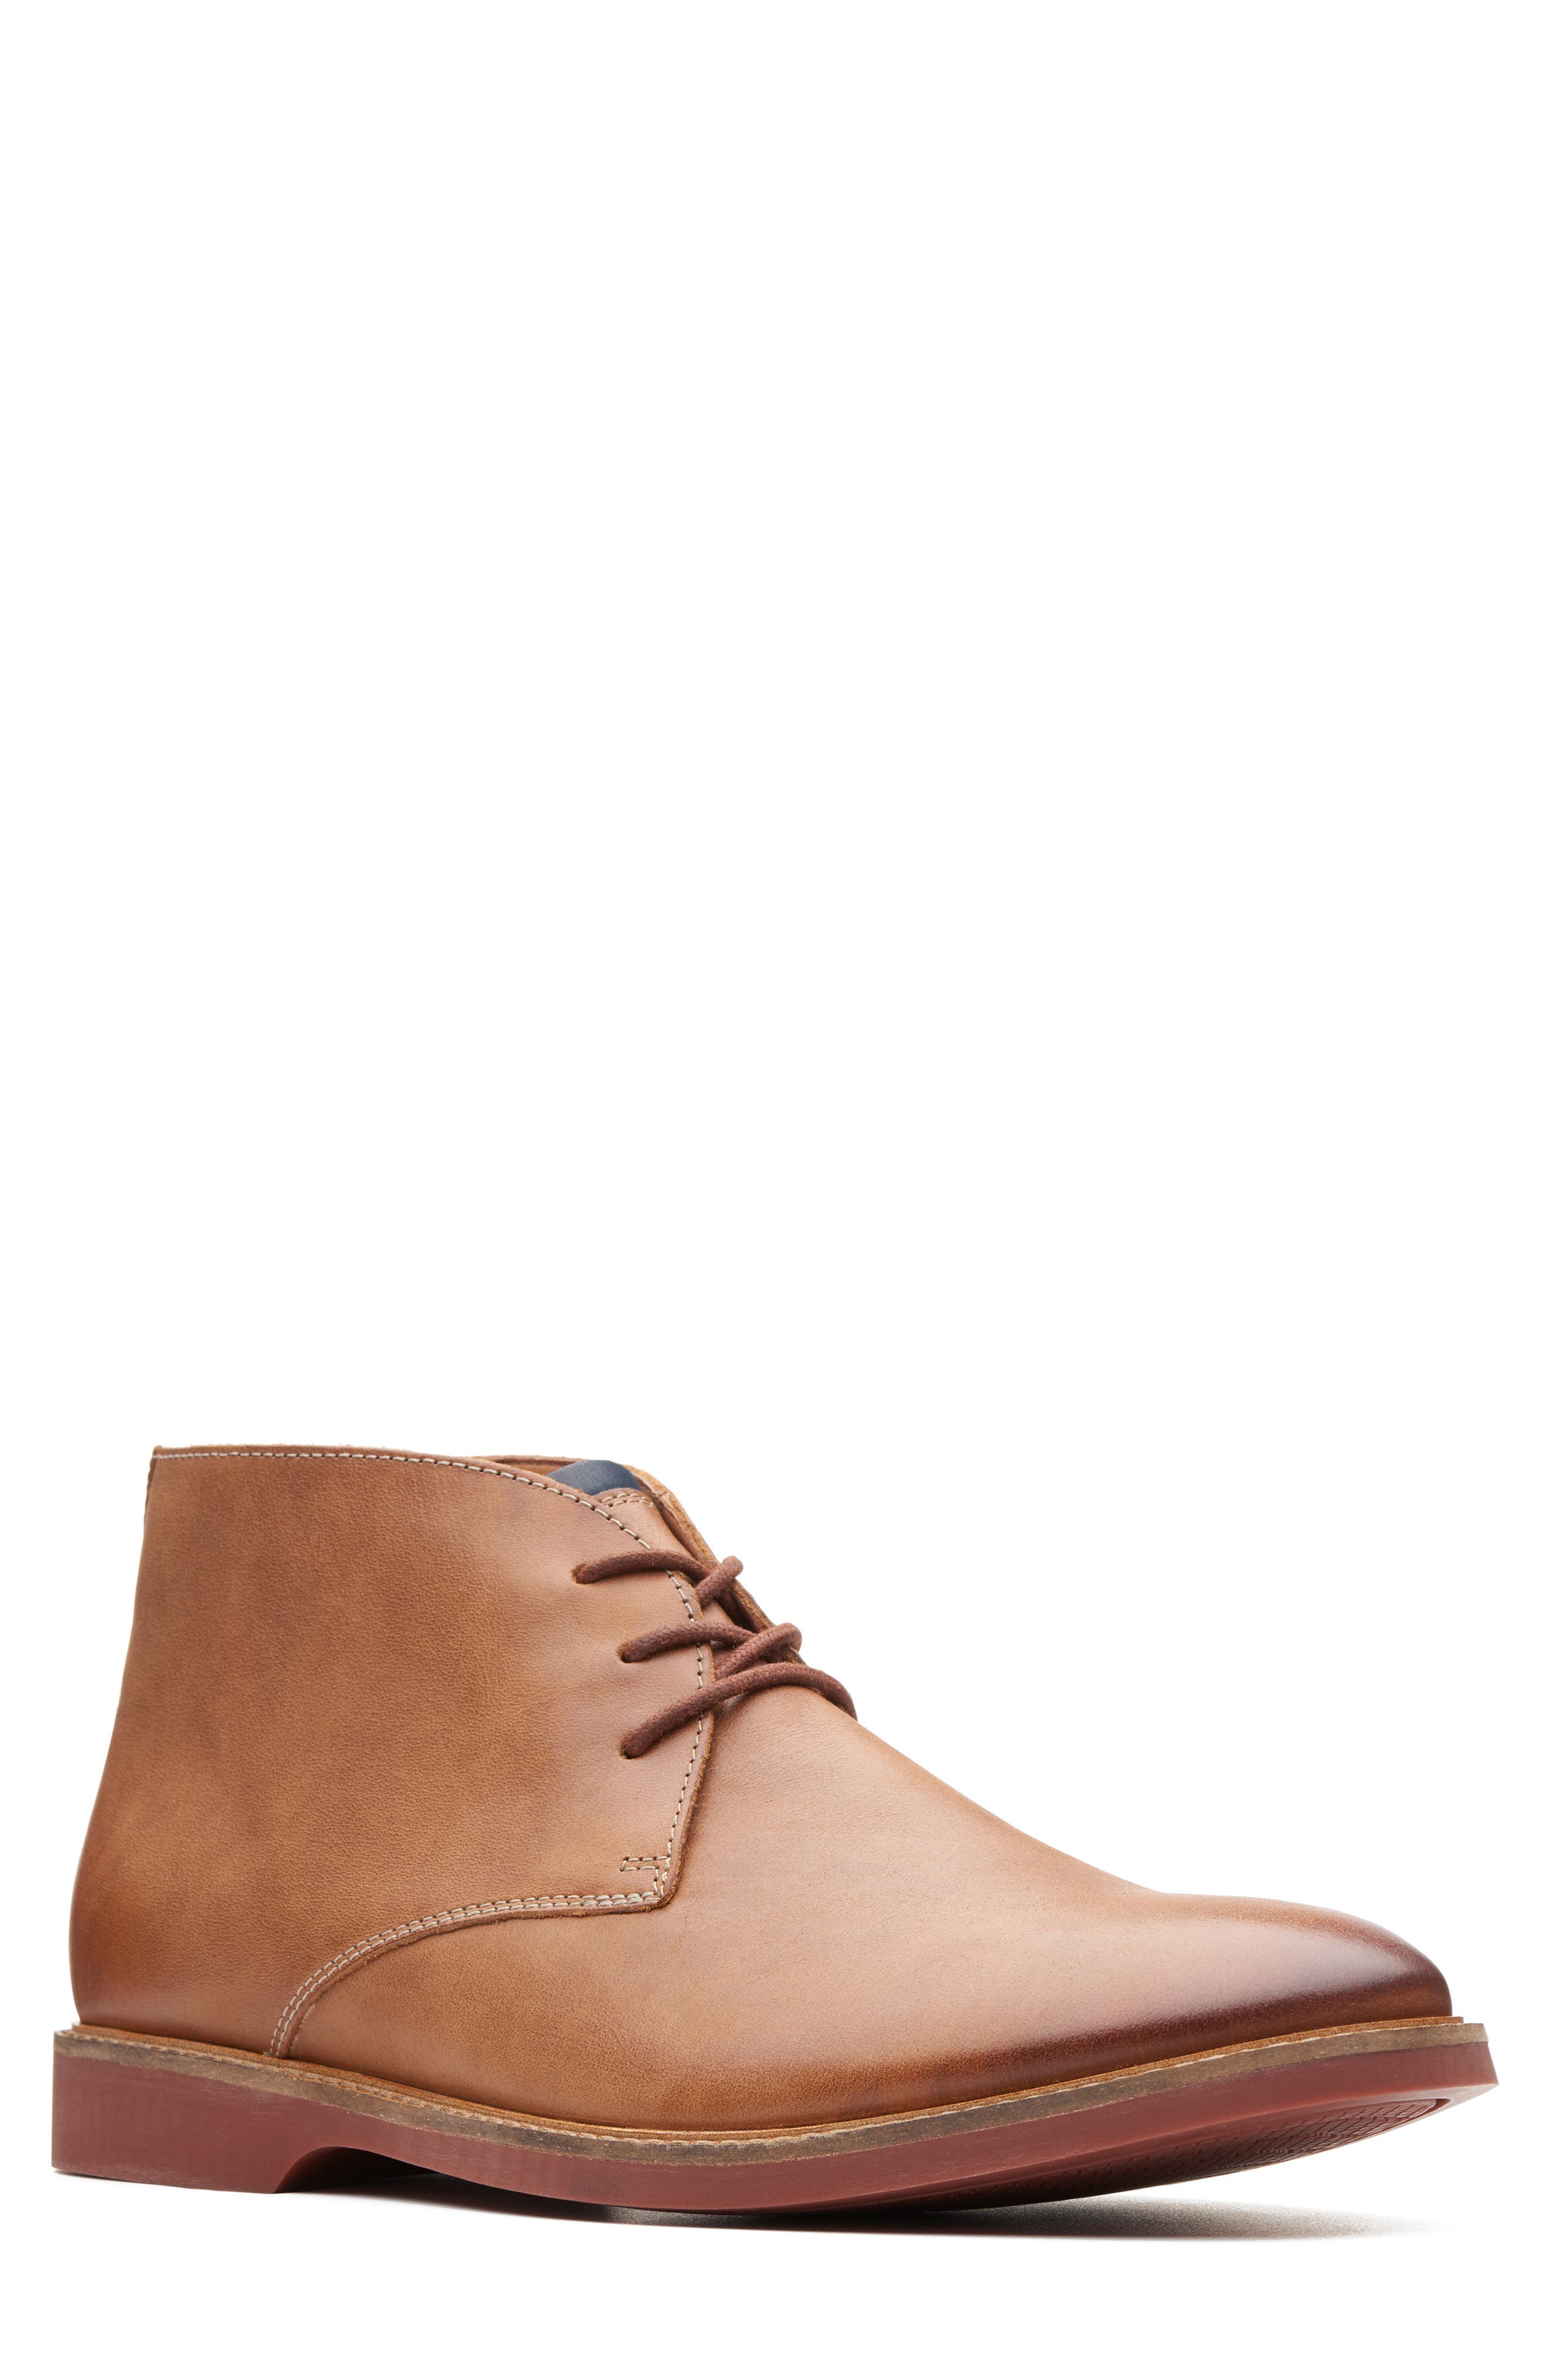 clarks shoes clearance